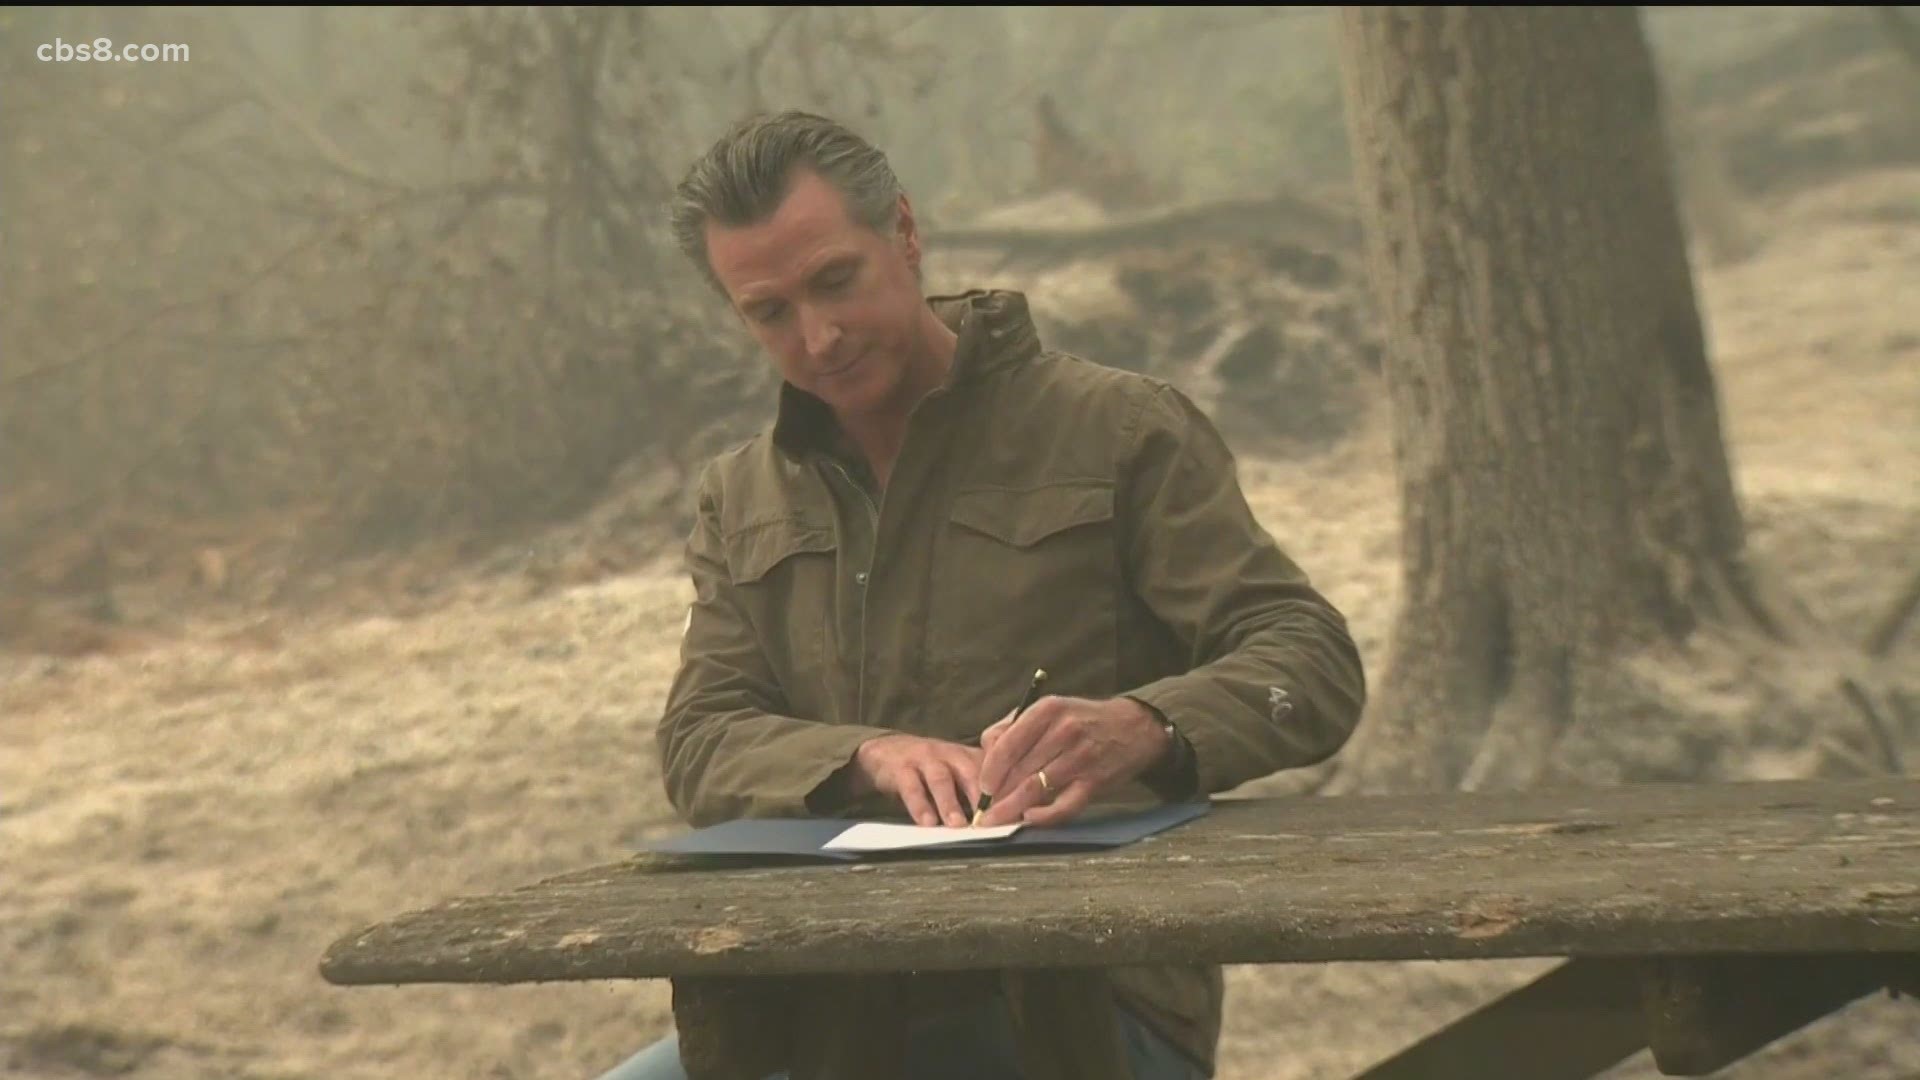 "Inmates who have stood on the frontlines, battling historic fires should not be denied the right to later become a professional firefighter," said Gov. Newsom